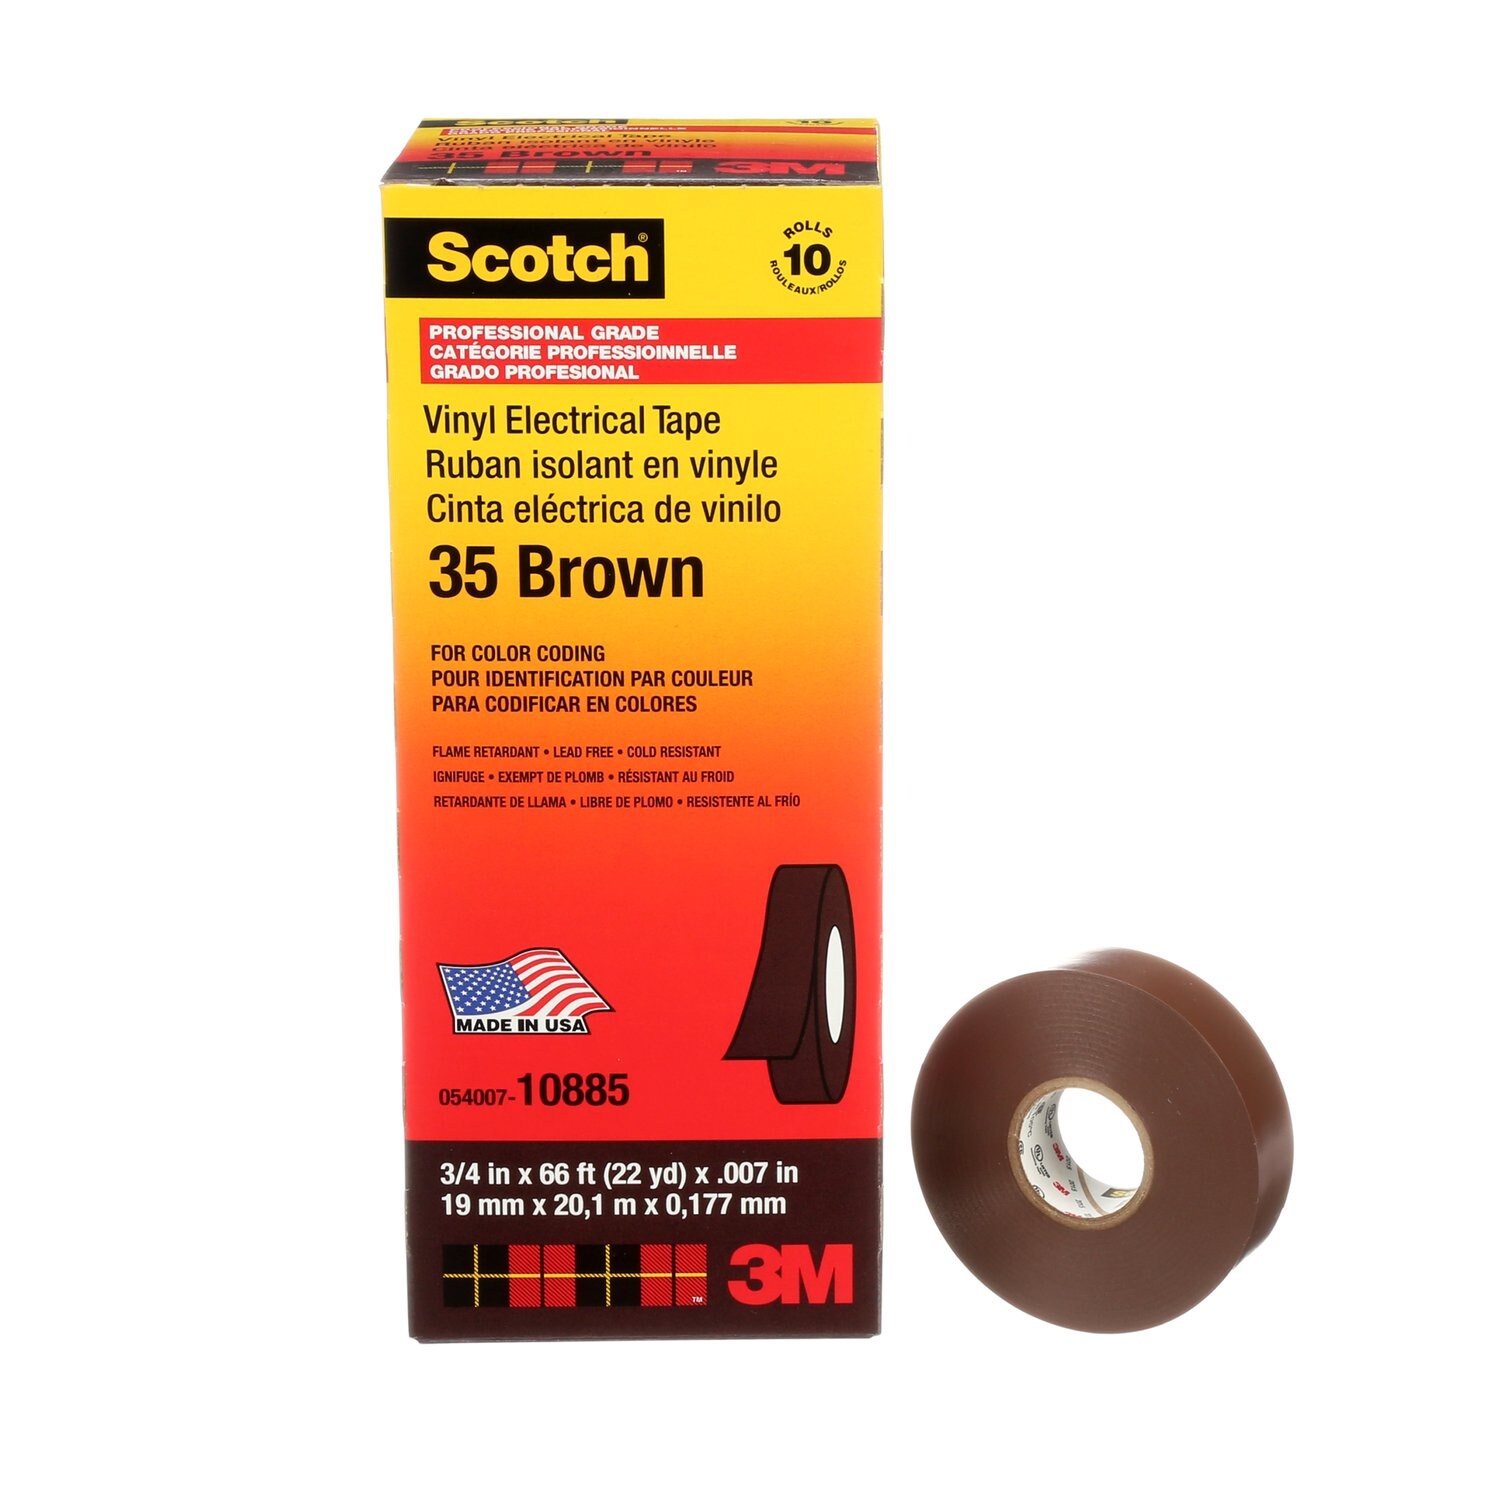 7000031580 - Scotch Vinyl Color Coding Electrical Tape 35, 3/4 in x 66 ft, Brown, 10
rolls/carton, 100 rolls/Case